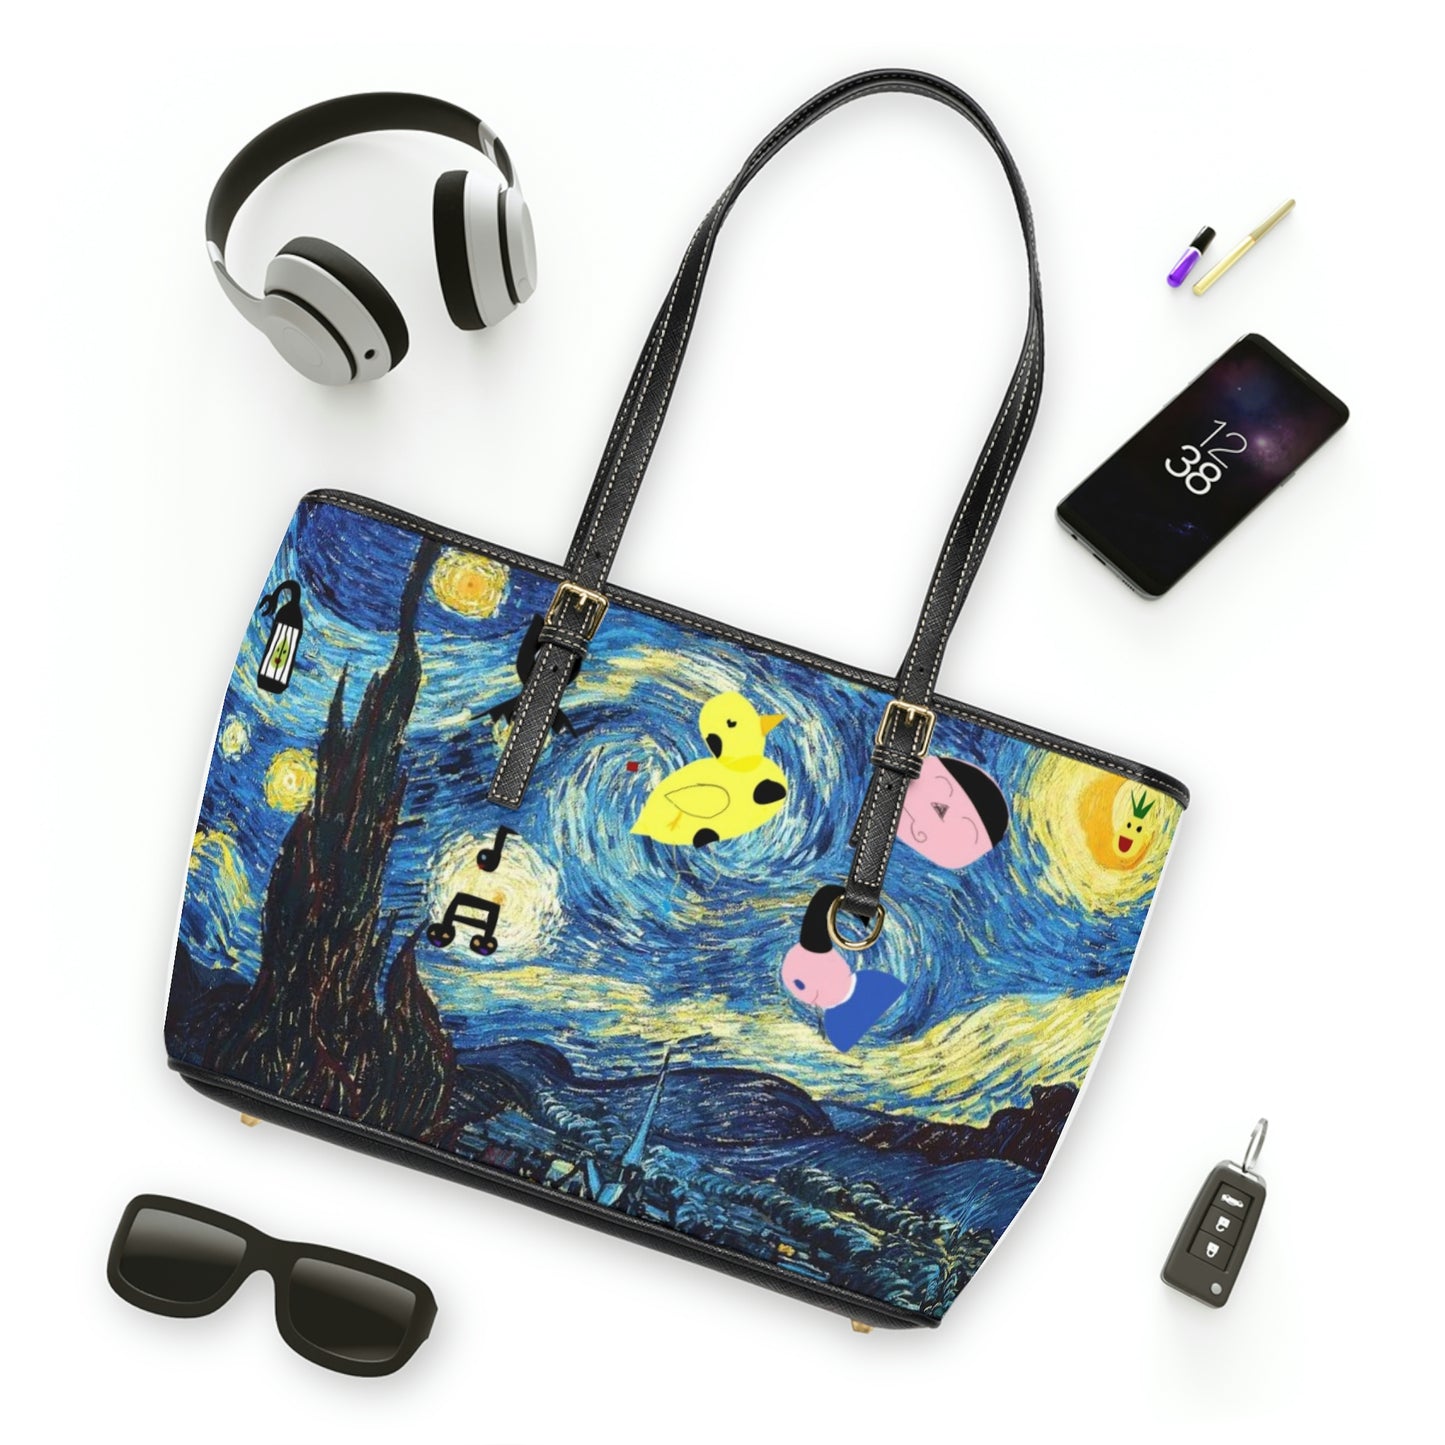 Vegan PU Leather Shoulder Bag with Oddly Starry Night Print by D.B.